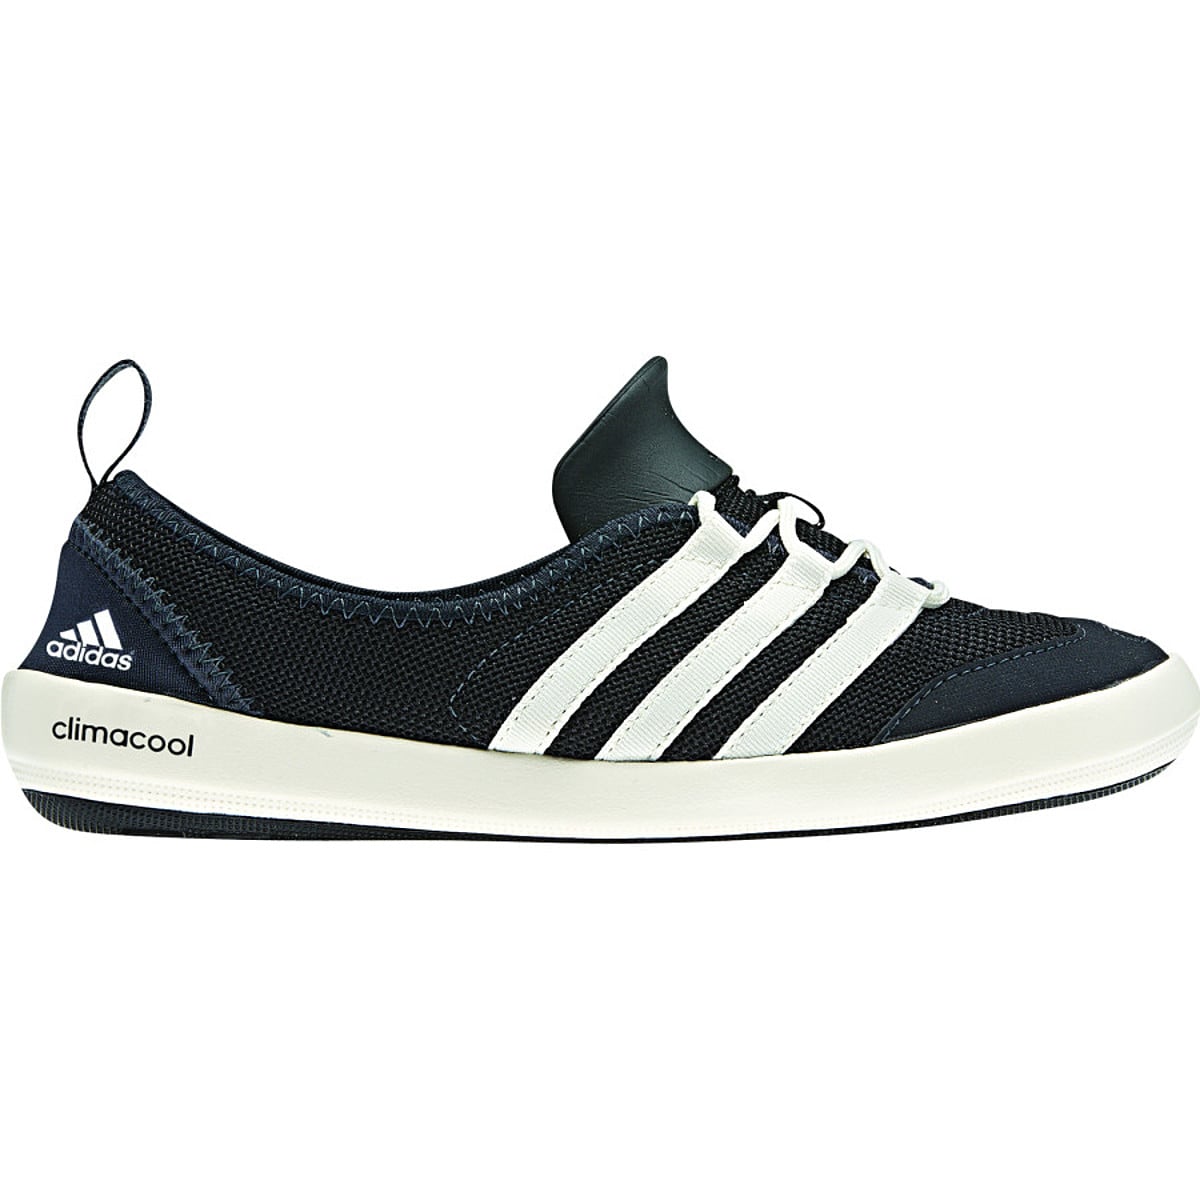 adidas climacool boat shoes womens